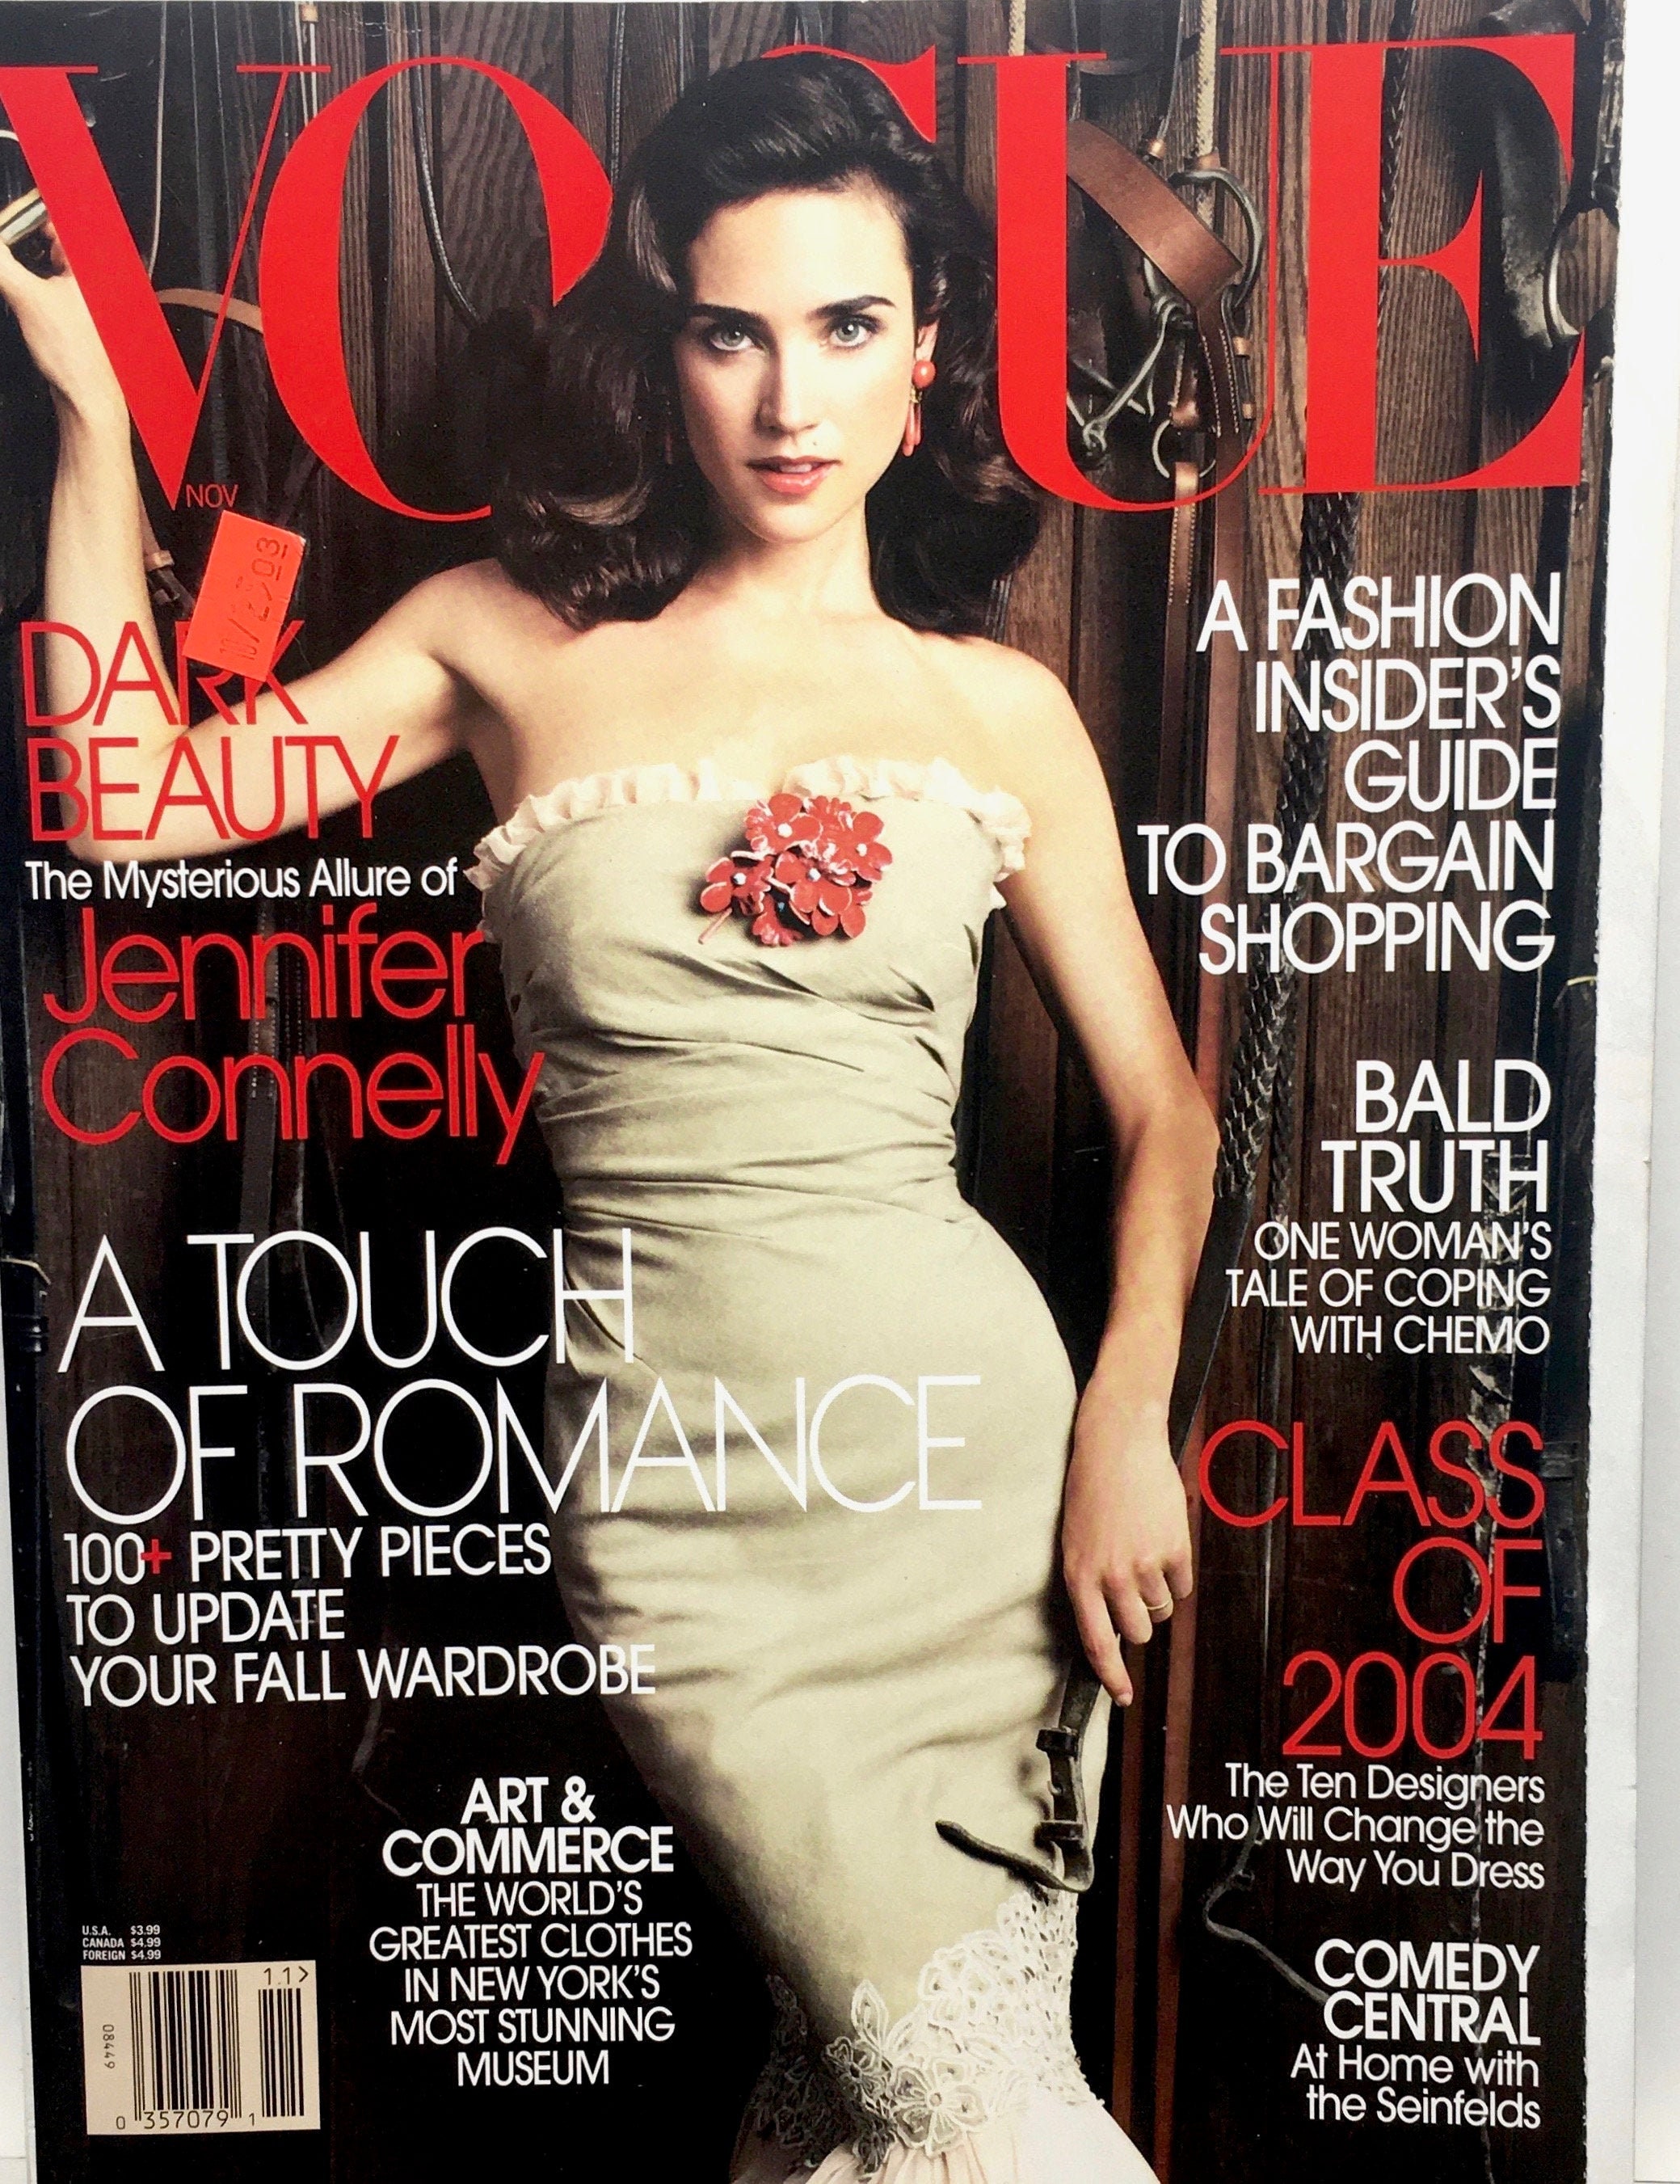 Jennifer Connelly is the Cover Star of Vogue Greece May 2022 Issue